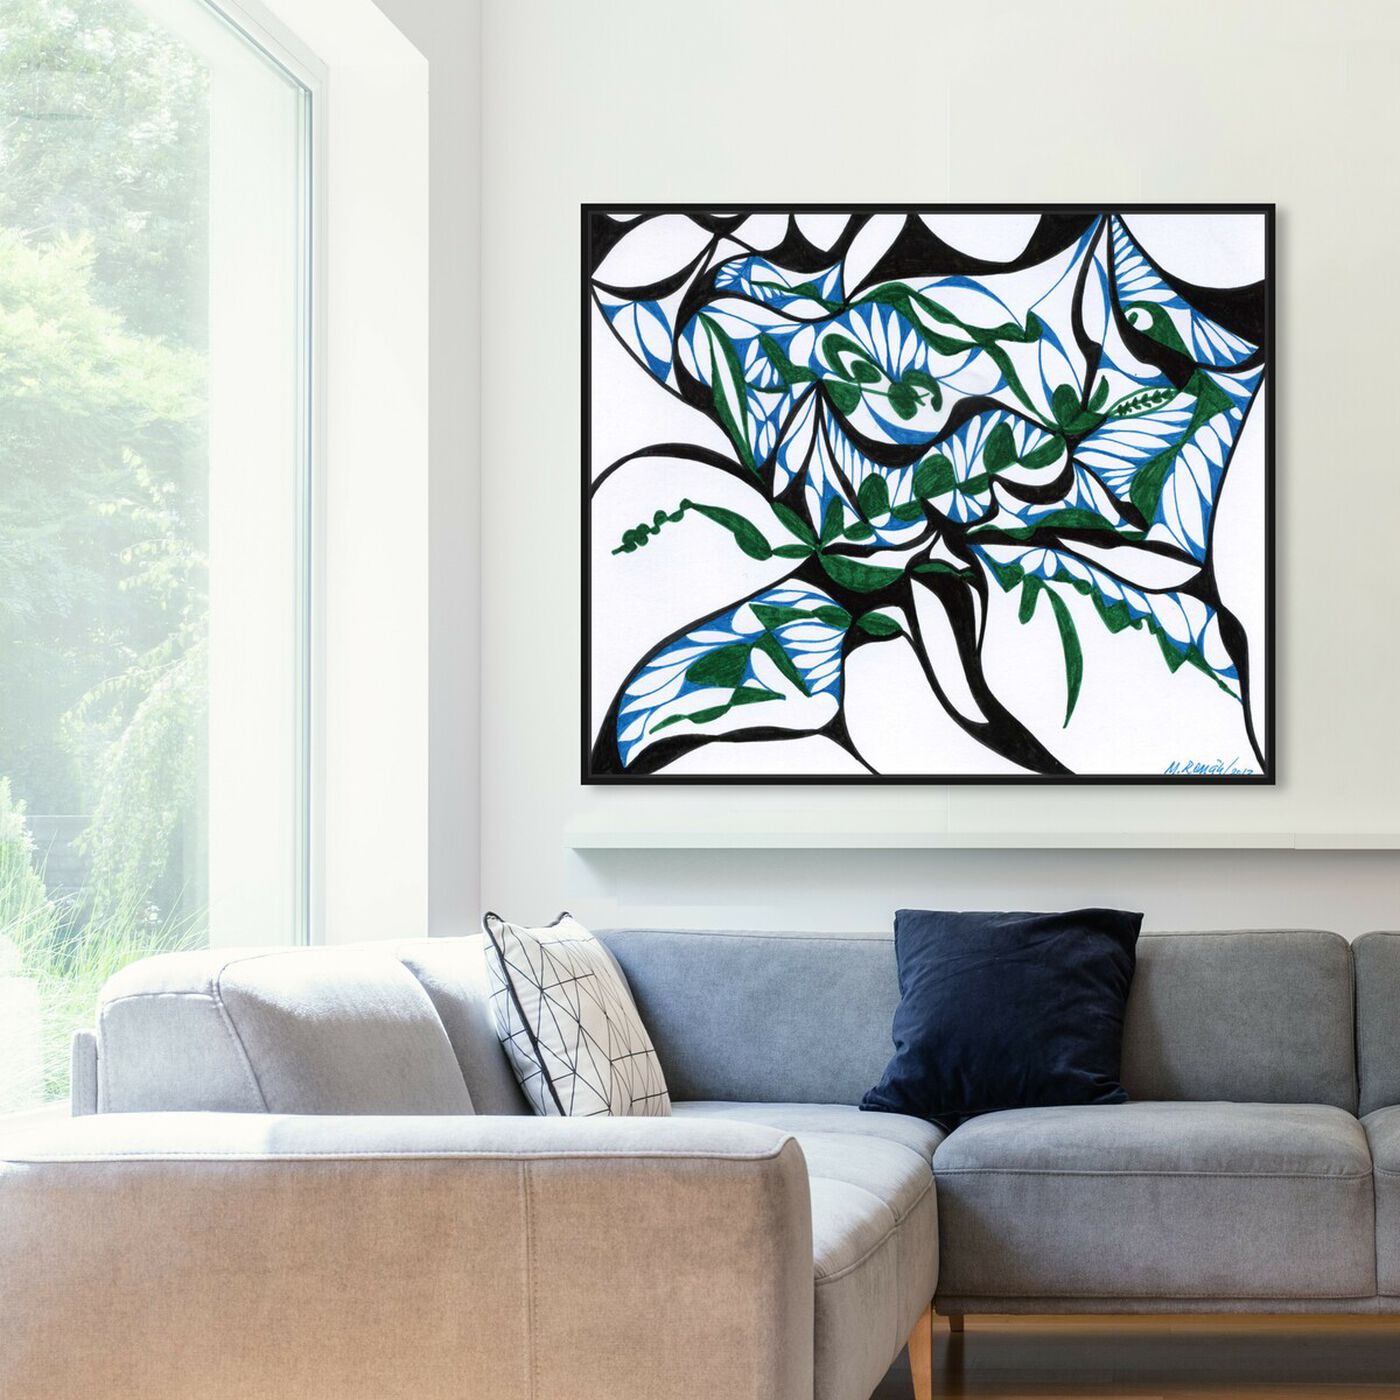 Hanging view of Swirling Ferns featuring abstract and geometric art.